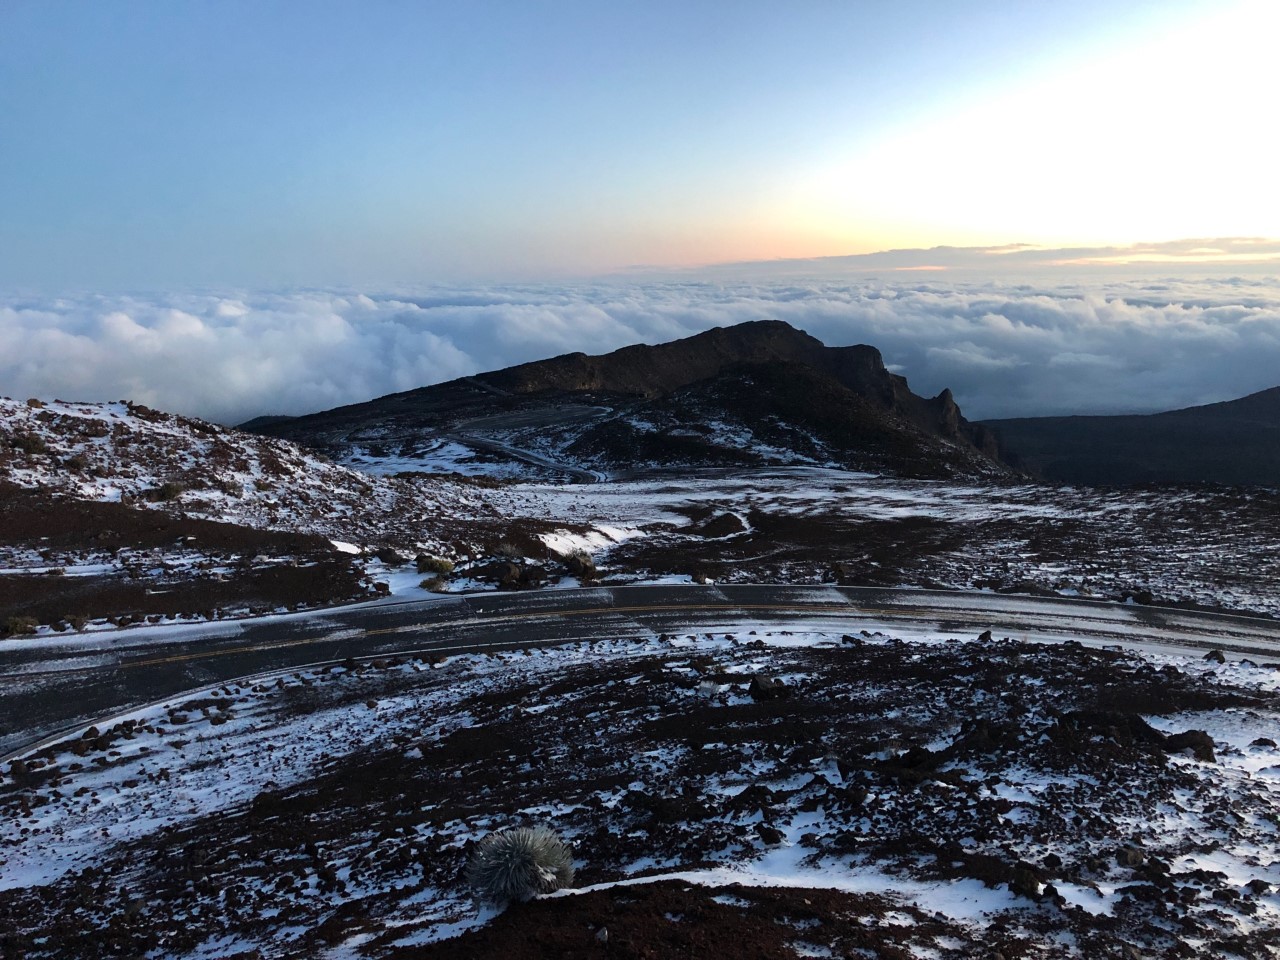 Snow and ice fall appear on rugged volcanic crater